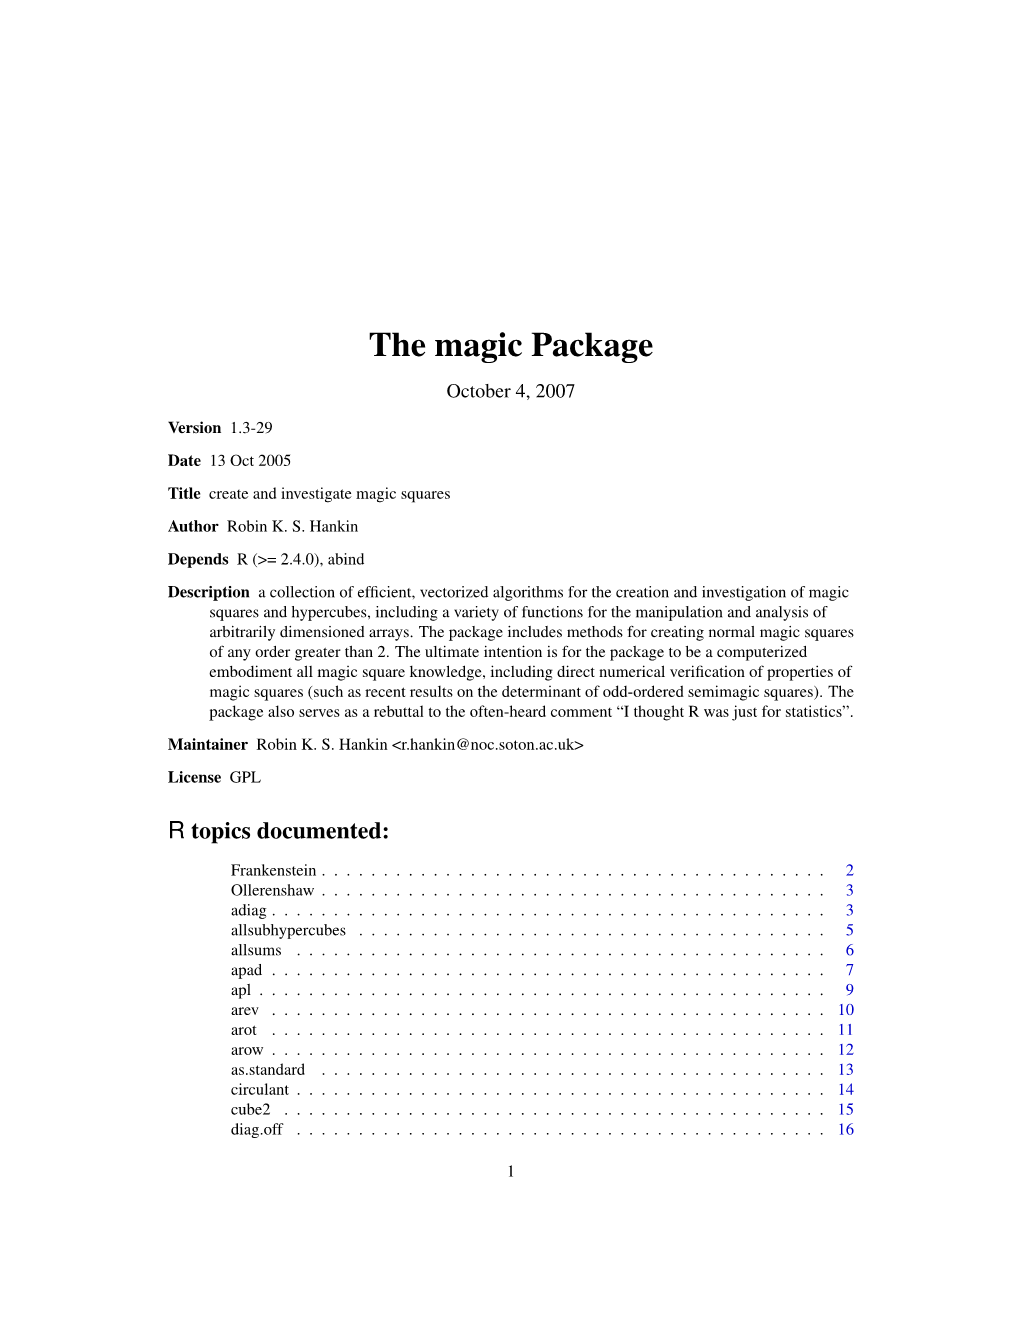 The Magic Package October 4, 2007